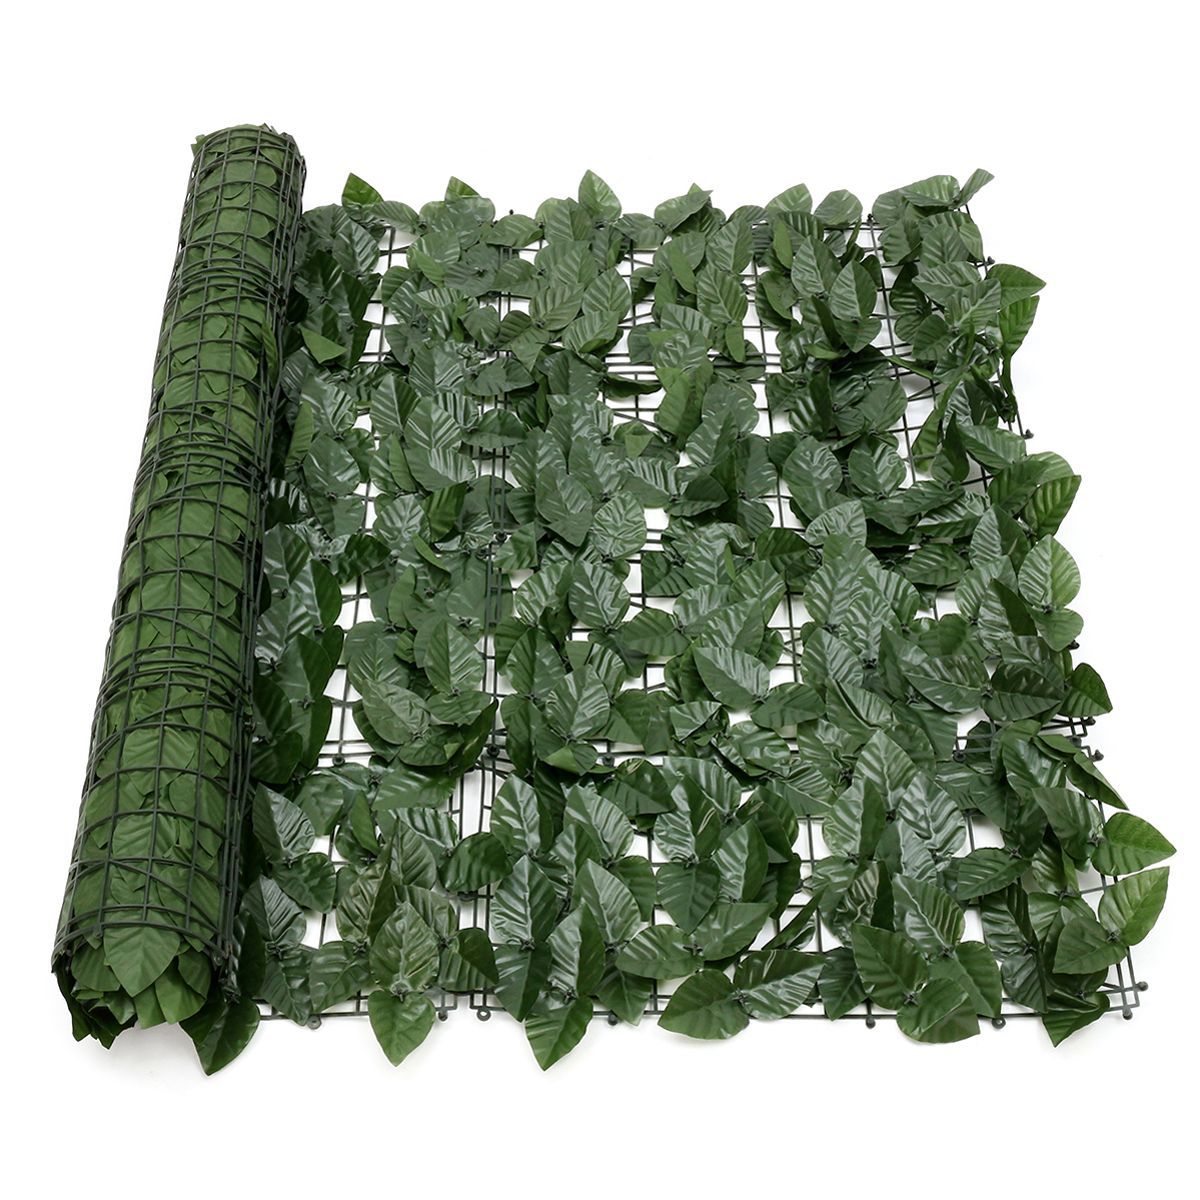 Expanding-13M-Artificial-Lvy-Leaf-Wall-Fence-Green-Garden-Screen-Hedge-Decorations-1474970